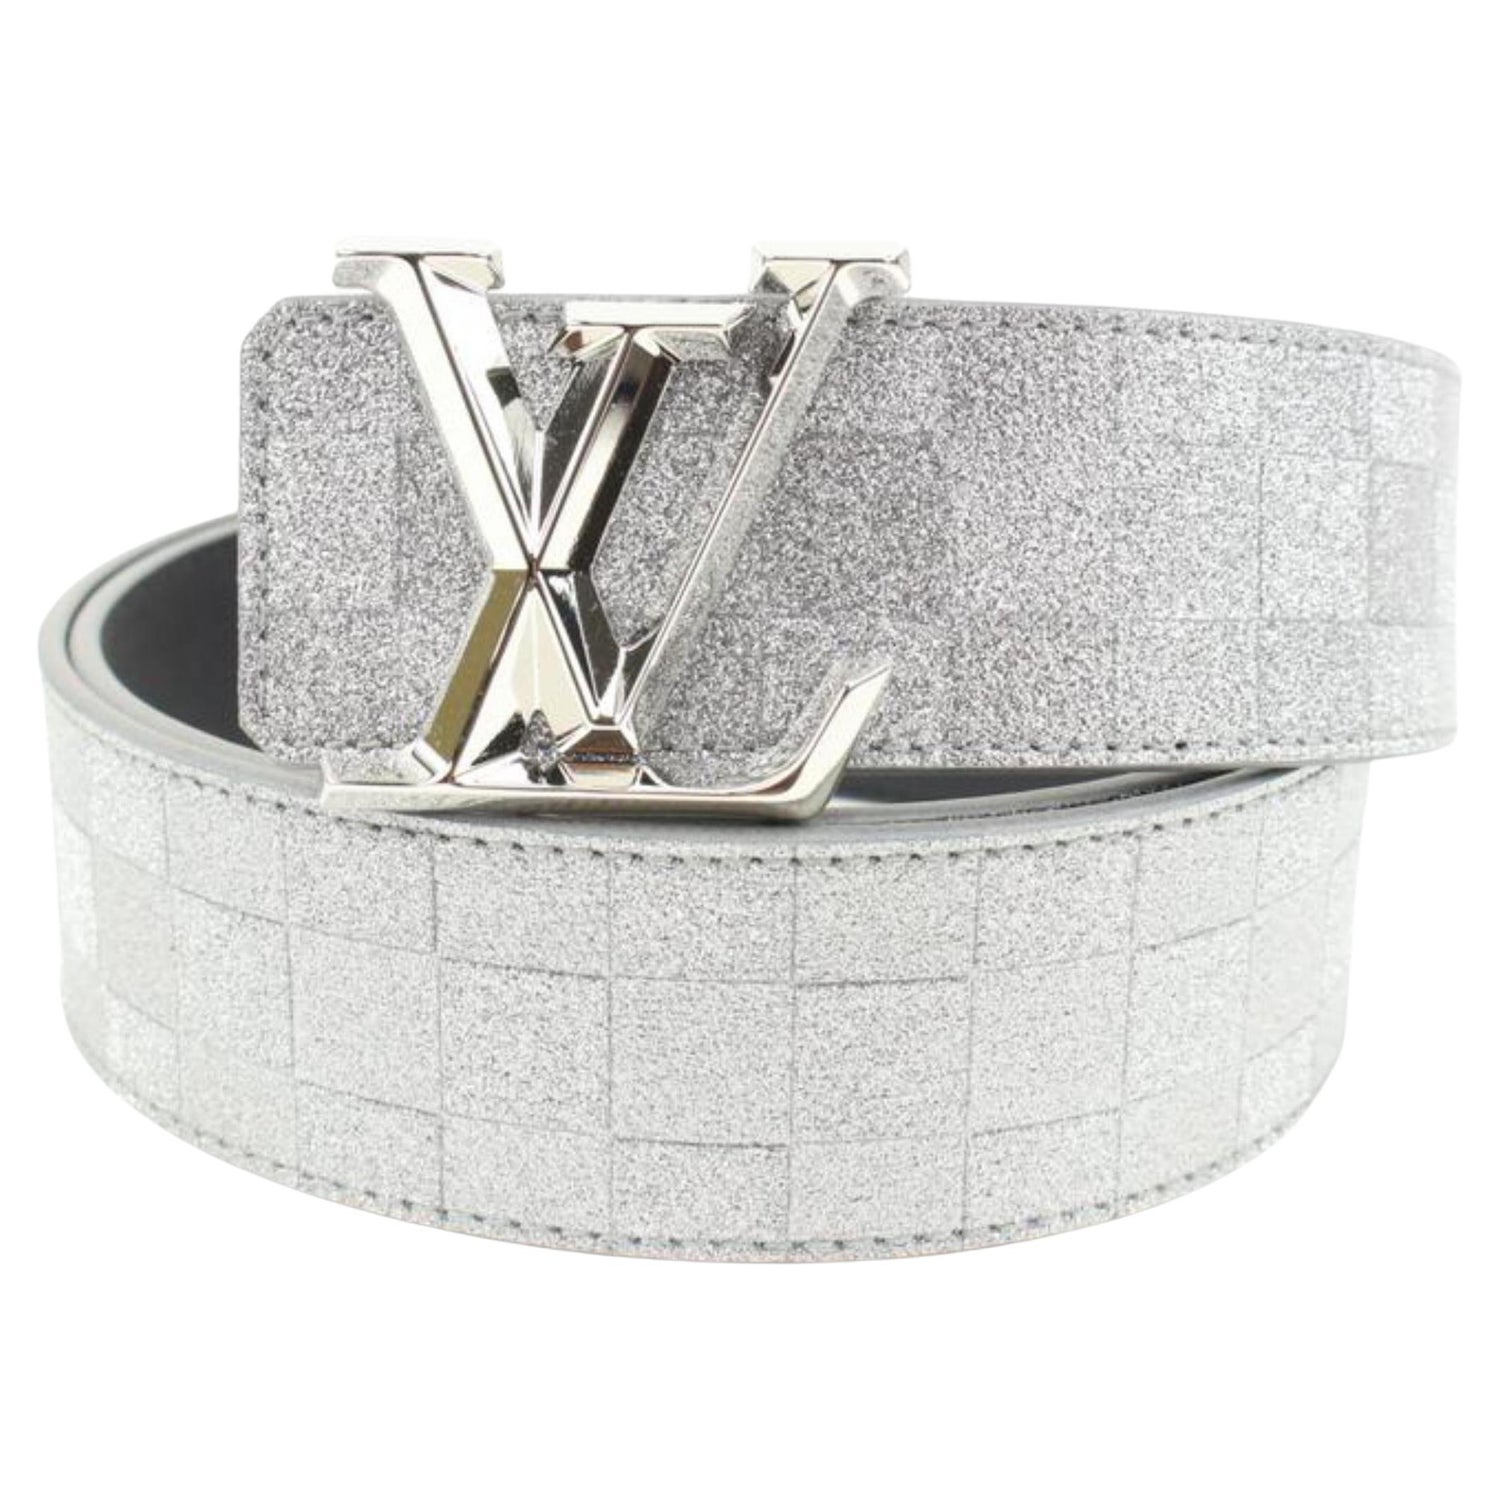 Louis Vuitton LV Initiales Reversible Belt Damier Cobalt 40MM Blue/Black in  Canvas/Calf Leather with Silver-tone - US